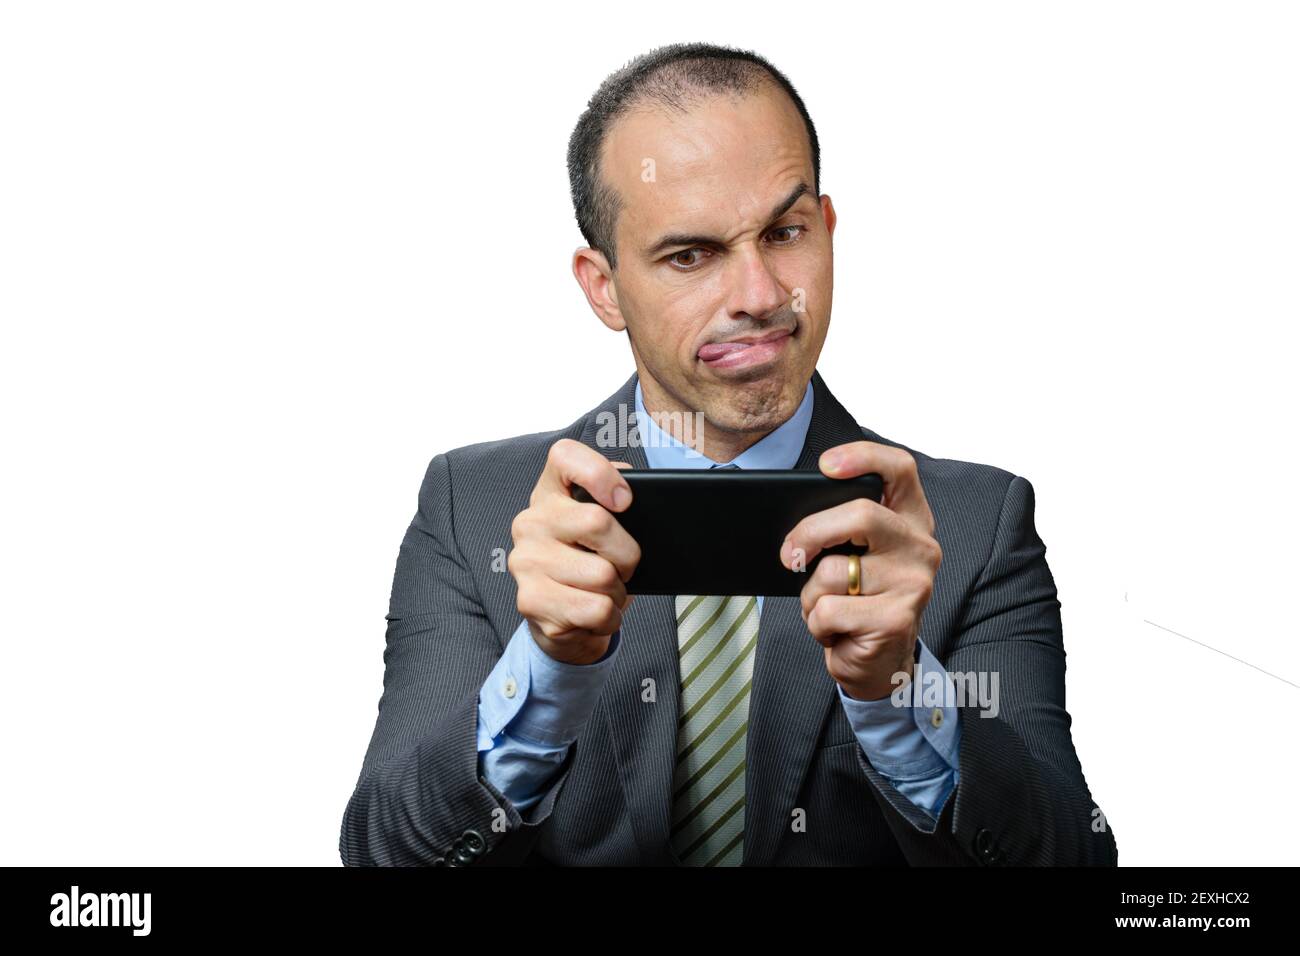 Mature man with suit and tie, biting his tongue, raised eyebrow and holding smarthphone horizontally. Stock Photo